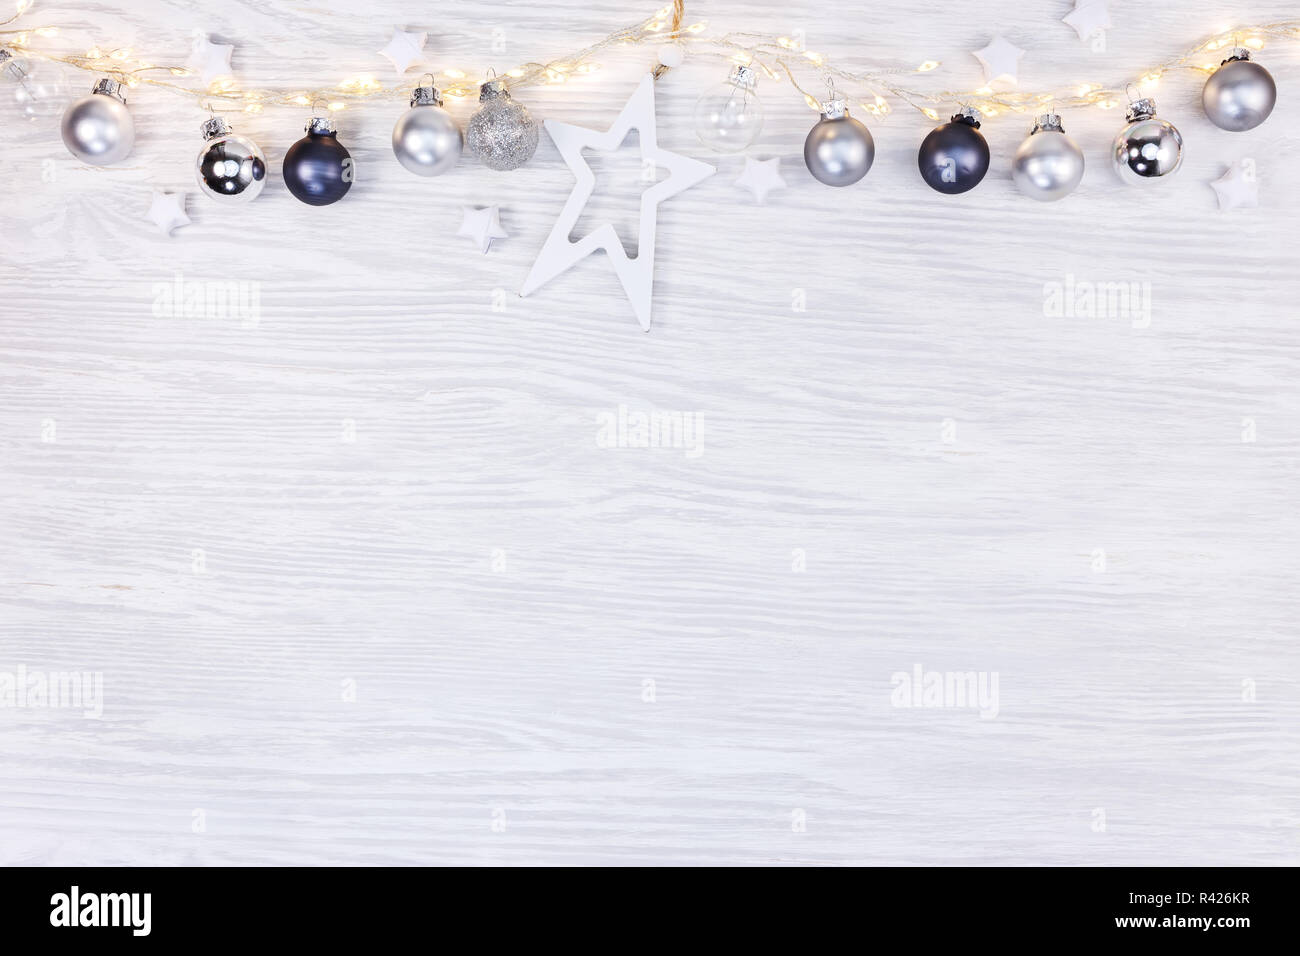 festive winter background with glowing light garlands, christmas tree balls and decorative stars. flat lay view with copyspace Stock Photo